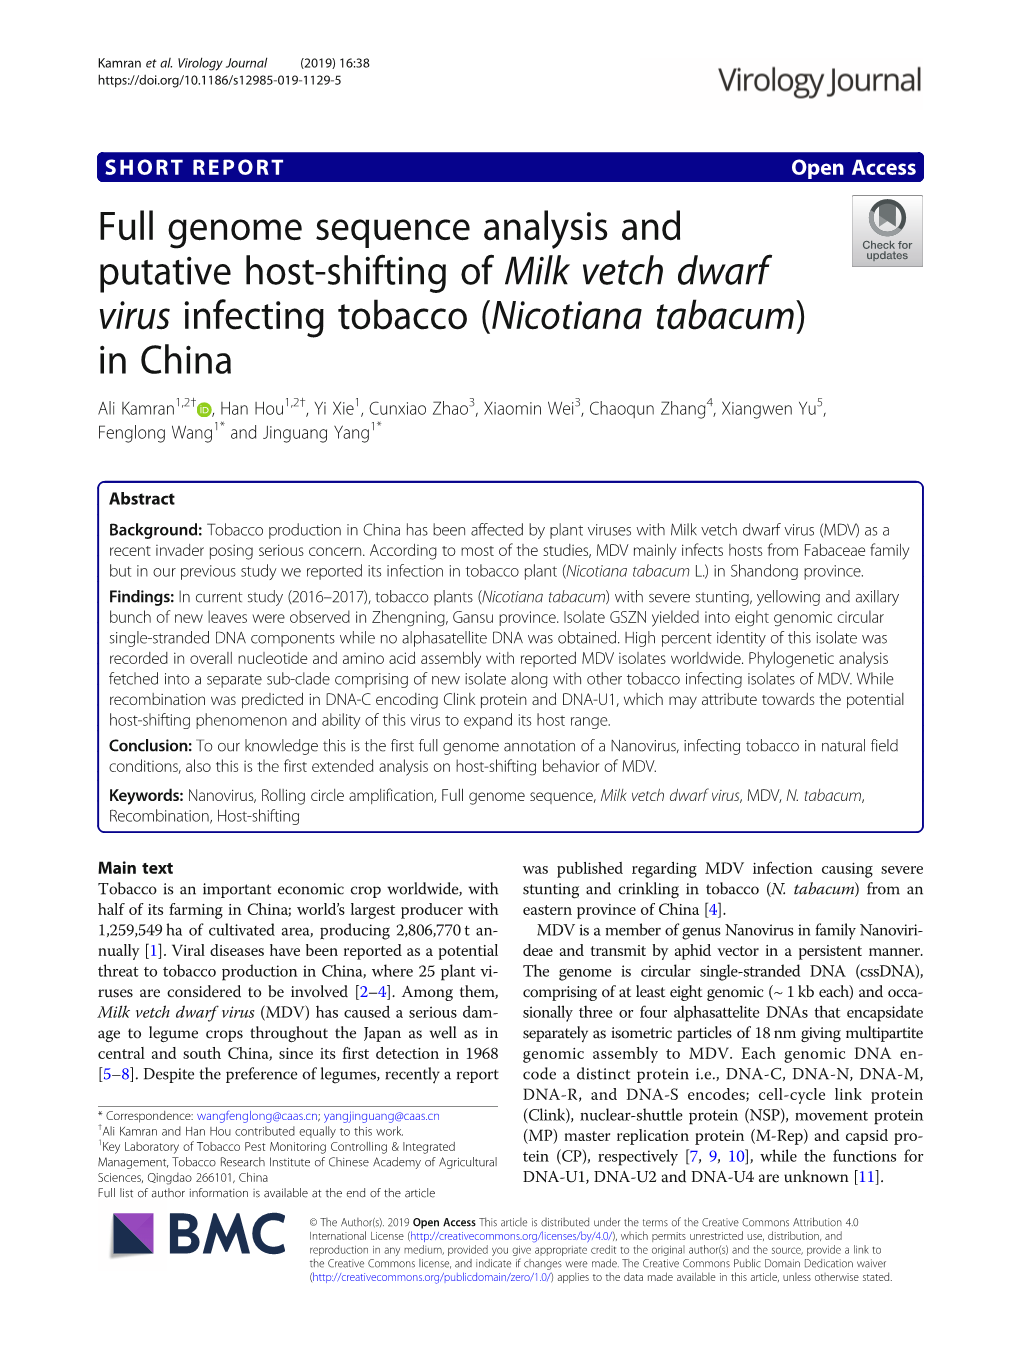 Full Genome Sequence Analysis and Putative Host-Shifting of Milk Vetch